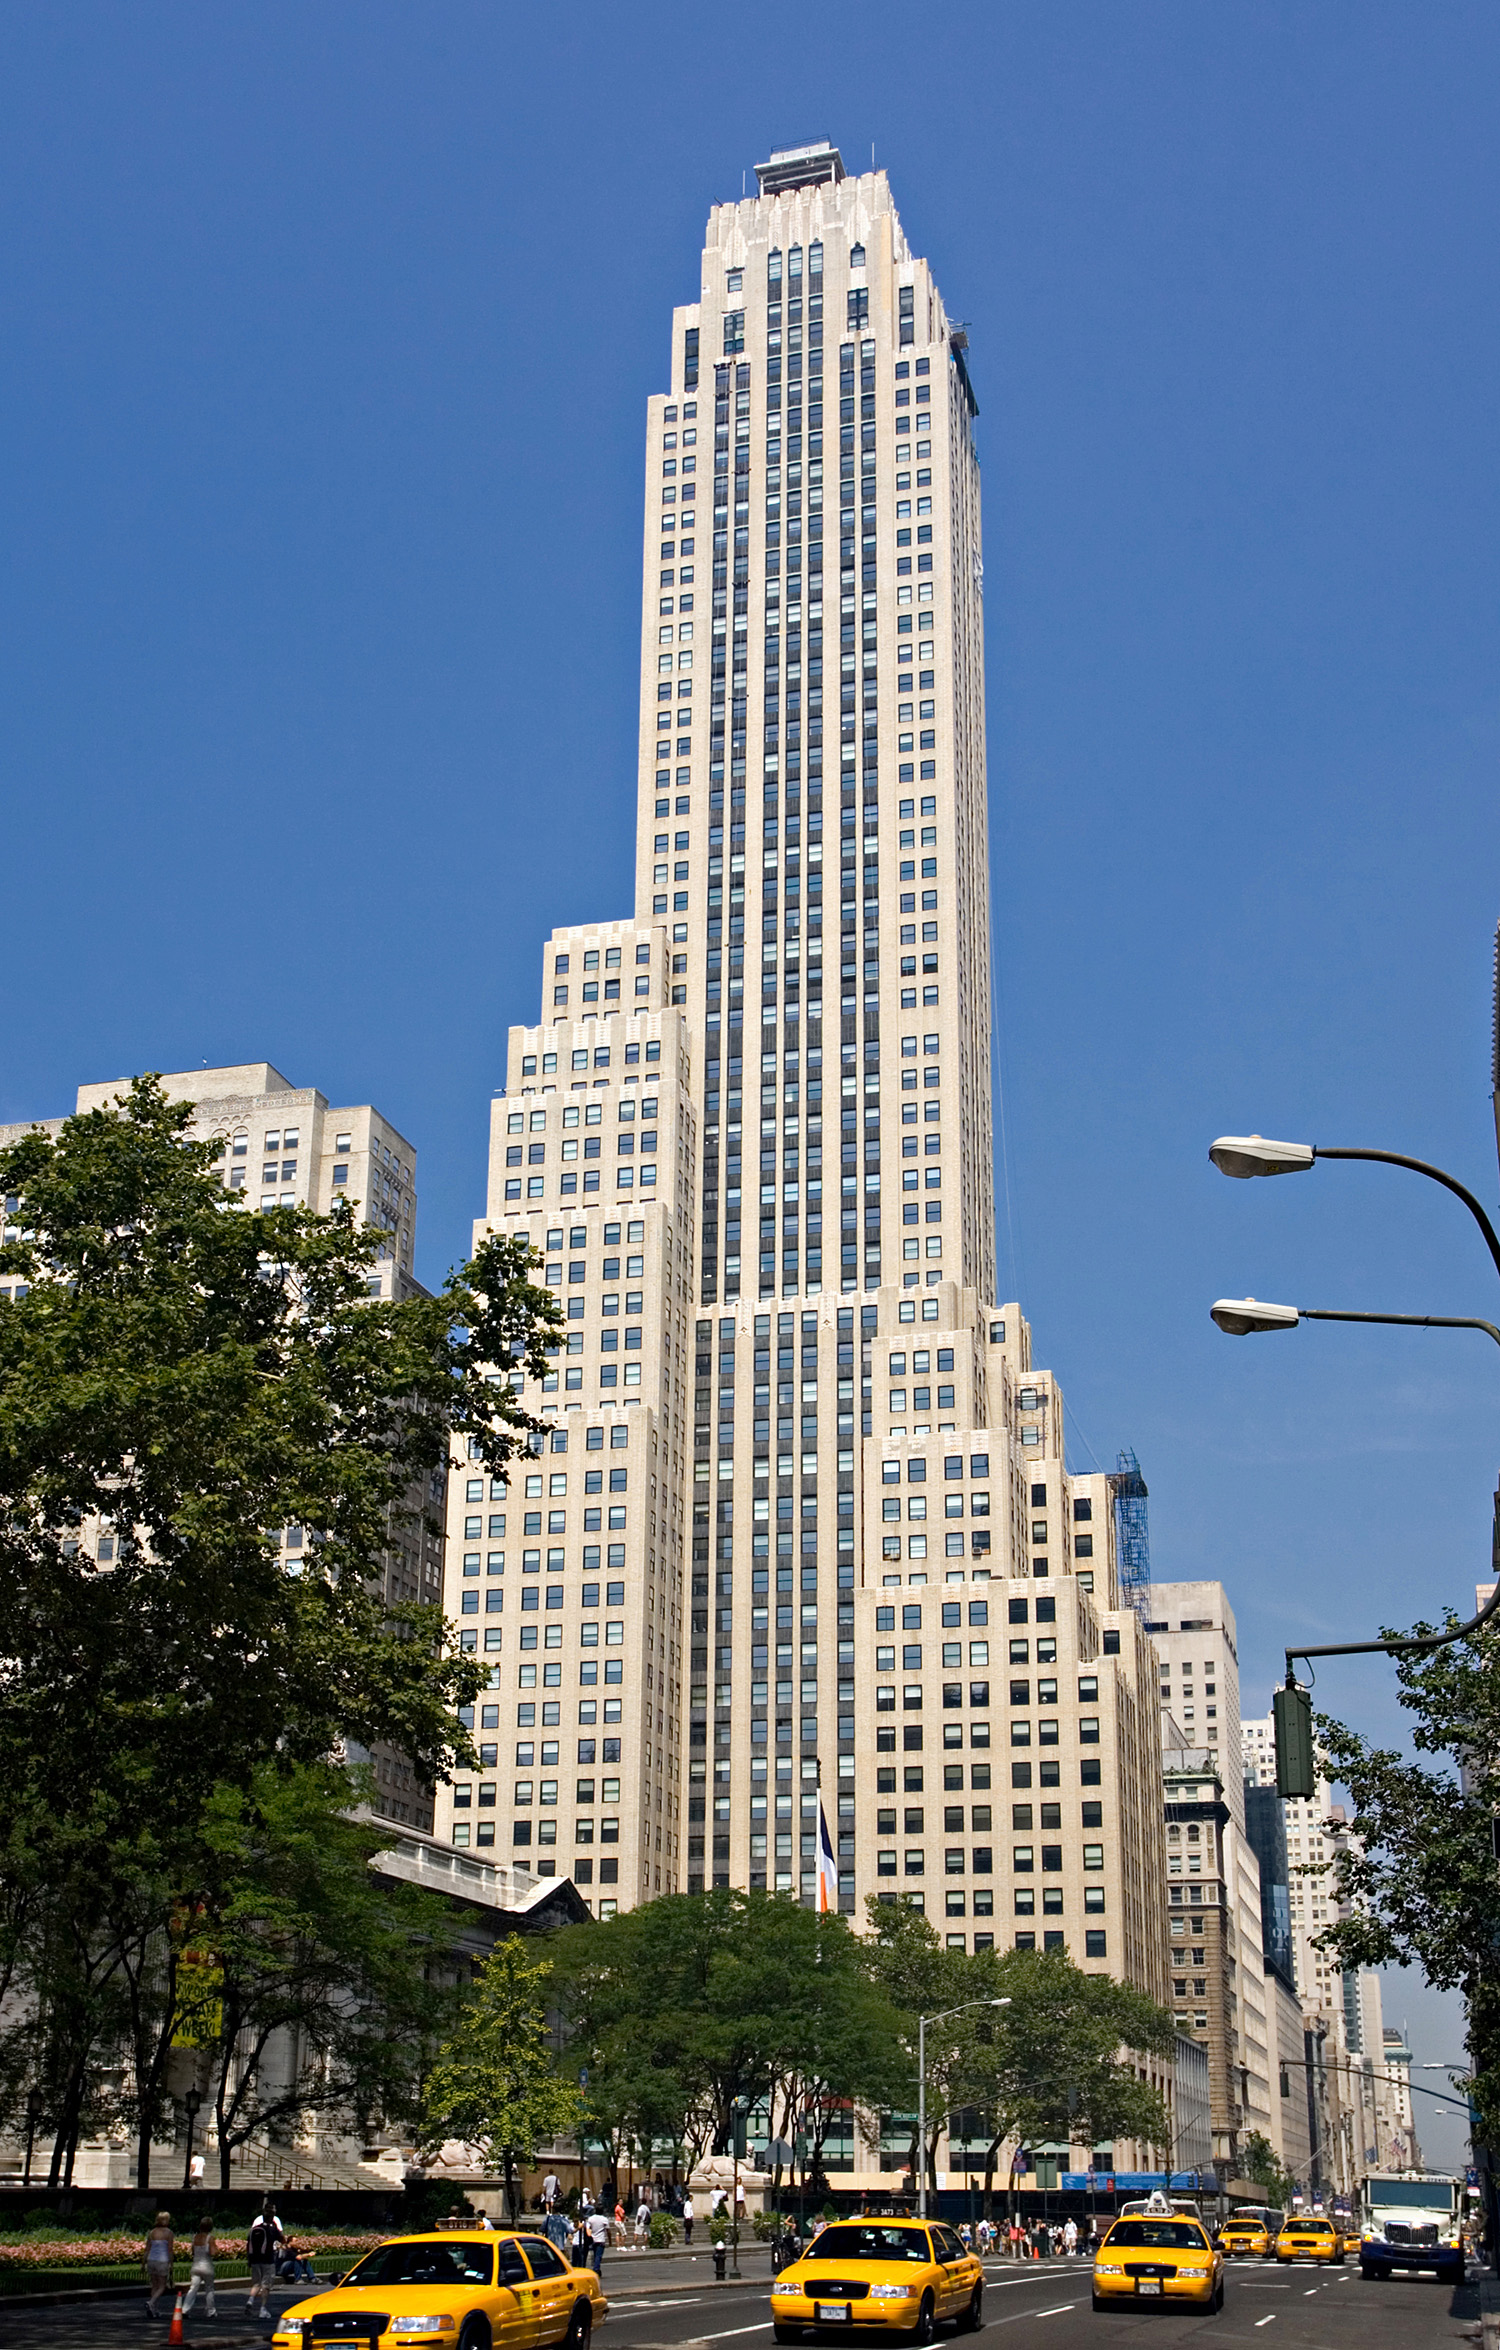 500 Fifth Avenue, New York City - View from the south. © Mathias Beinling